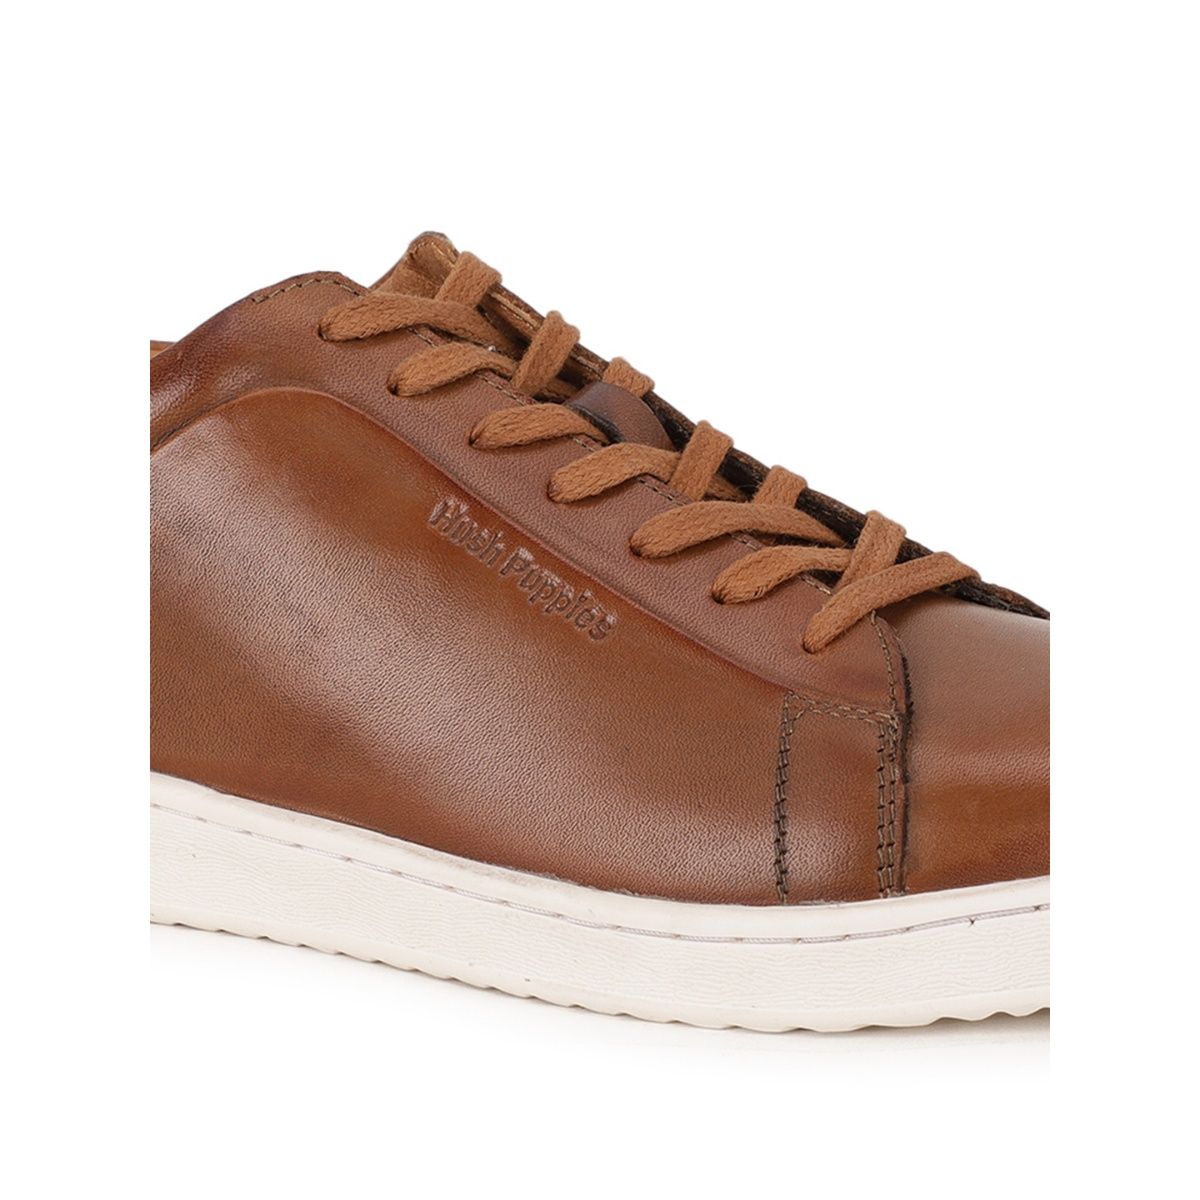 Dusty M Hp Dark Tan Leather by Hush Puppies | Shop Online at Mountfords